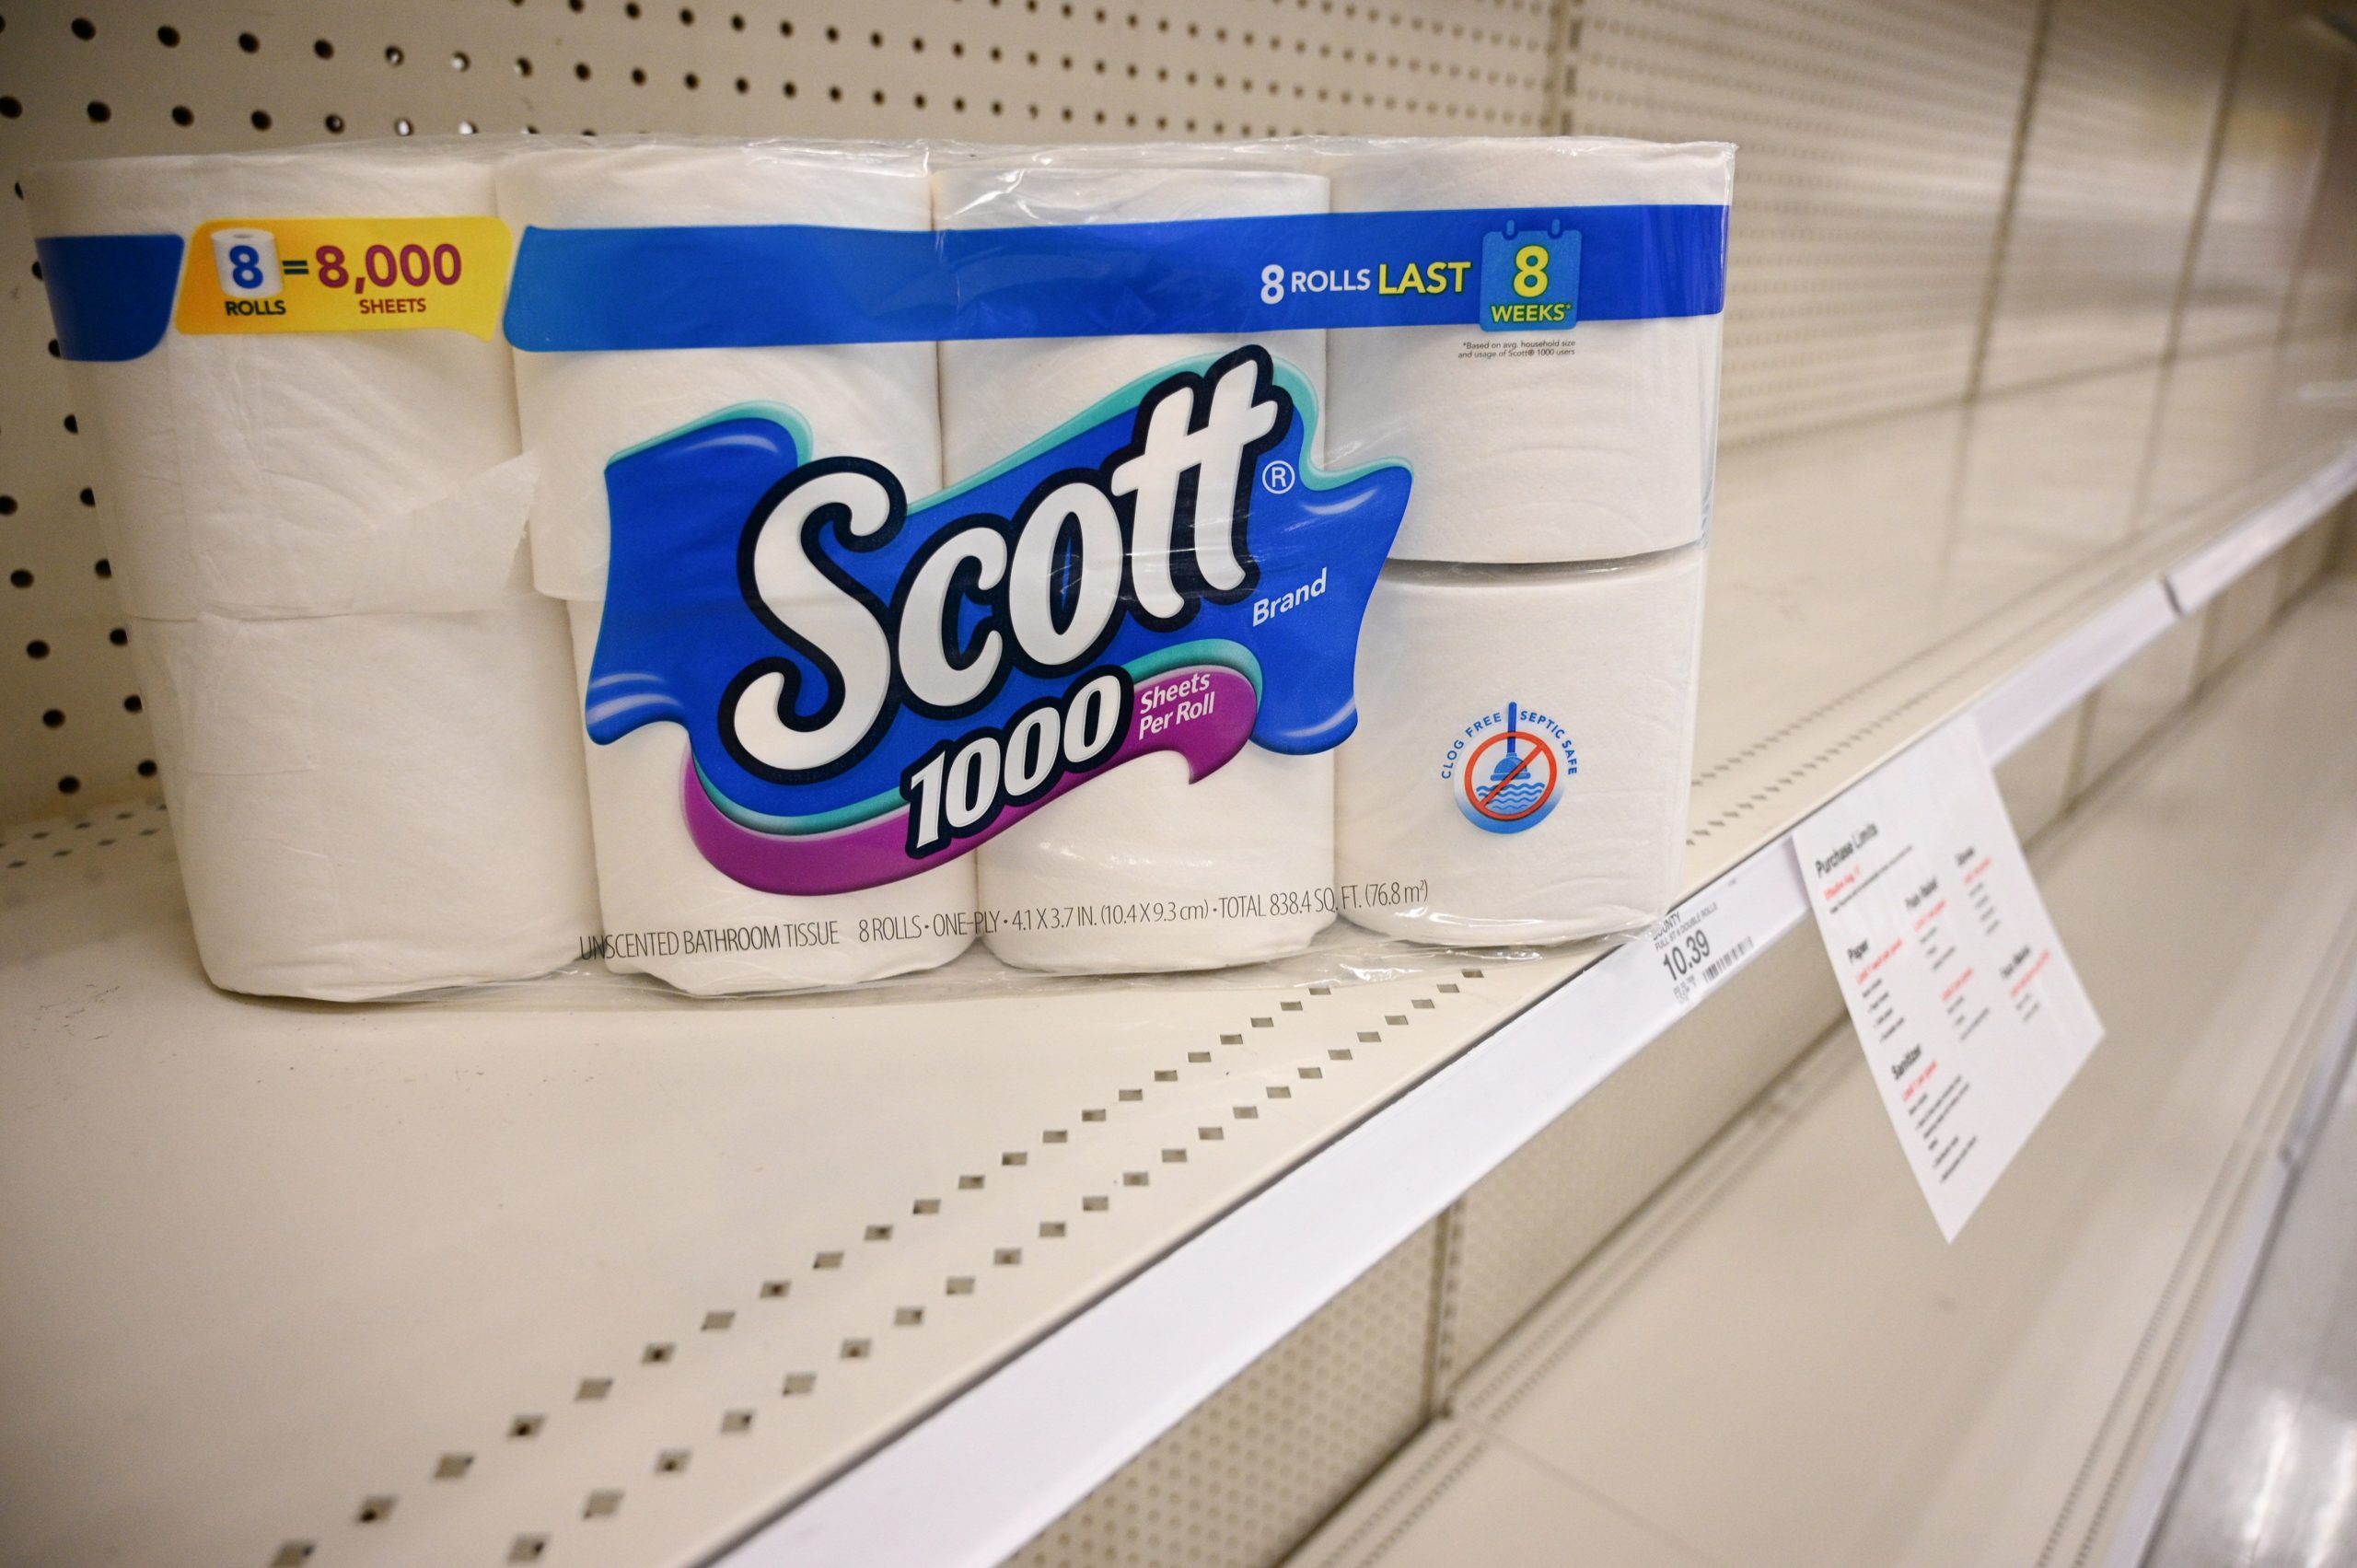 A package of toilet paper sits on an otherwise empty shelf in the paper products aisle of a store in Burbank, California, November 19, 2020. (Photo by ROBYN BECK/AFP via Getty Images)